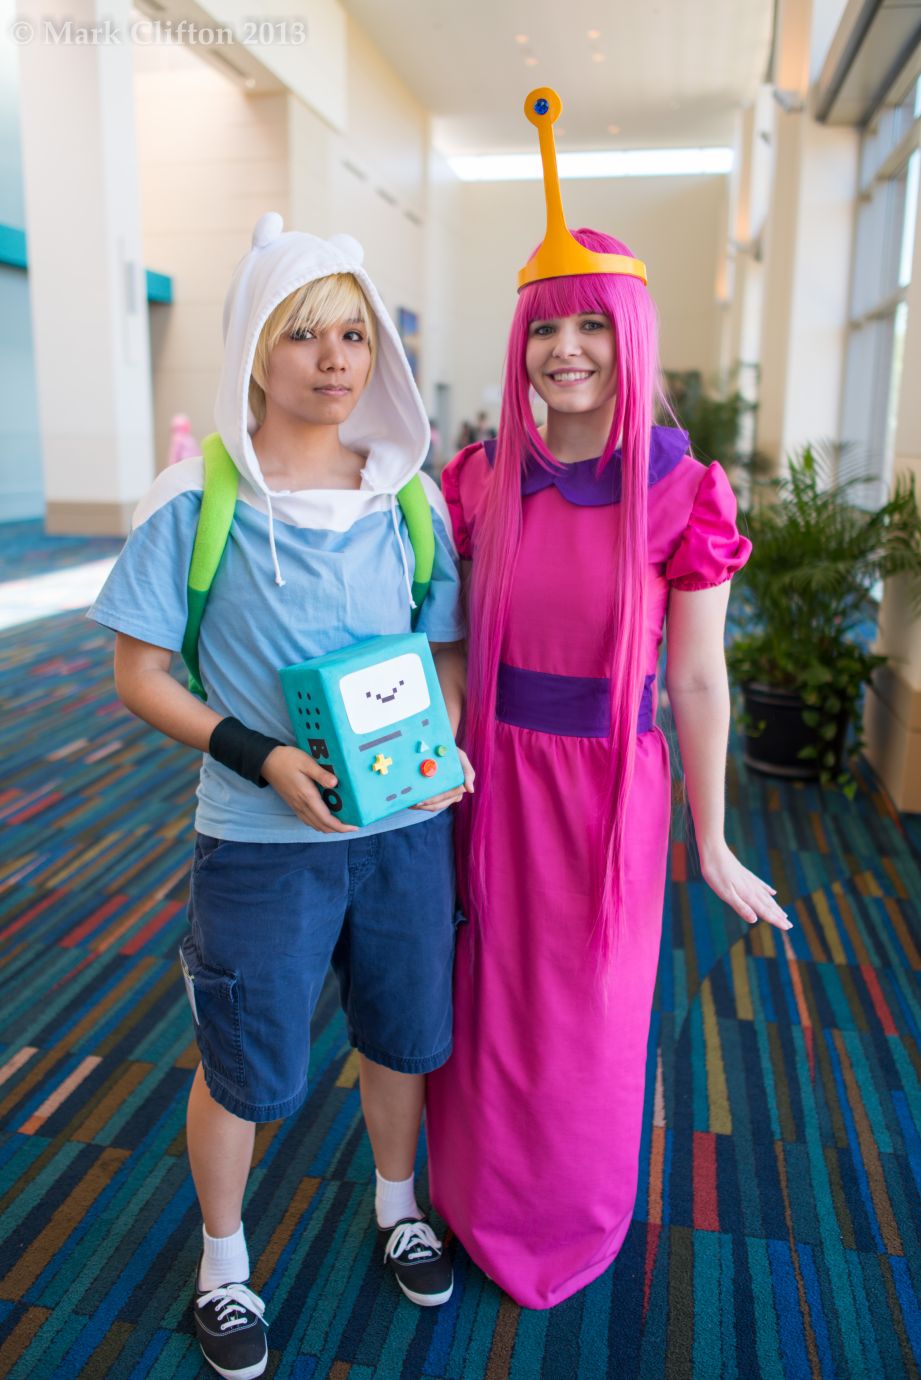 Photo of candiie?wish cosplaying Finn (Adventure Time with Finn and Jake) .